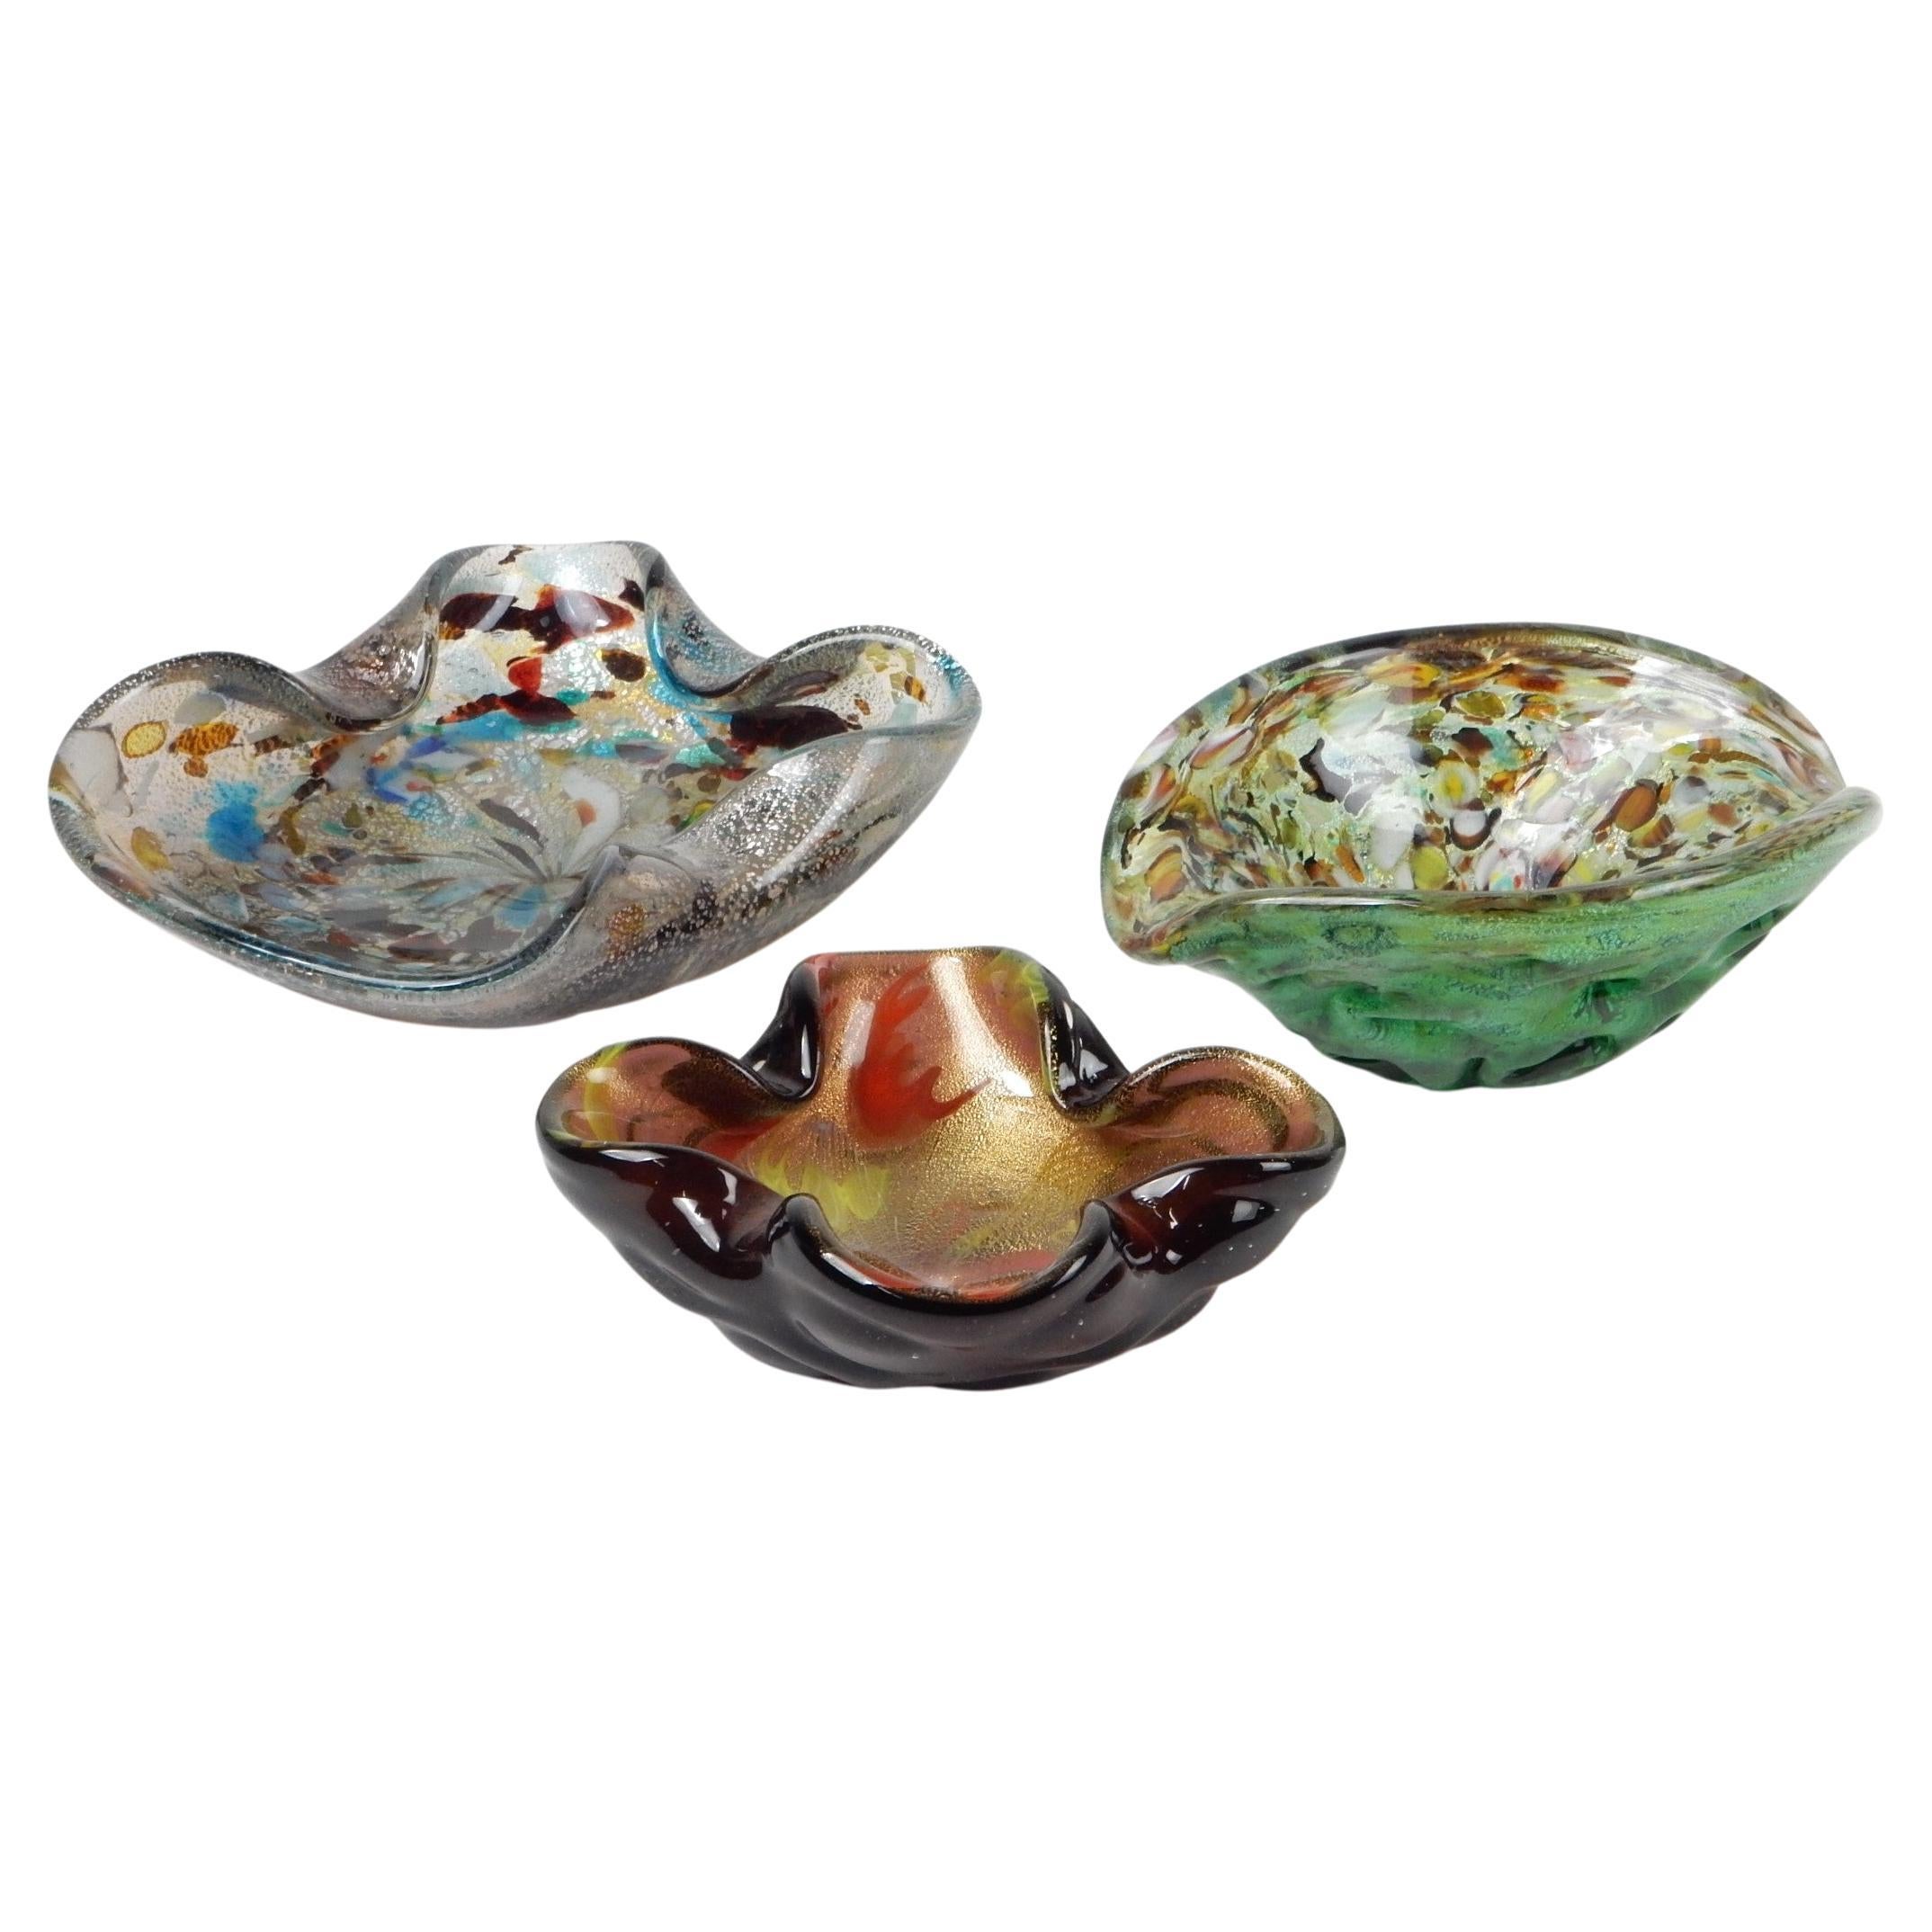 Lovely set of 3 Murano Italy art glass bowls / ashtrays.
Circa 1950's-60's. 
None are marked or etched. All are in excellent condition without chips.
They measure 8